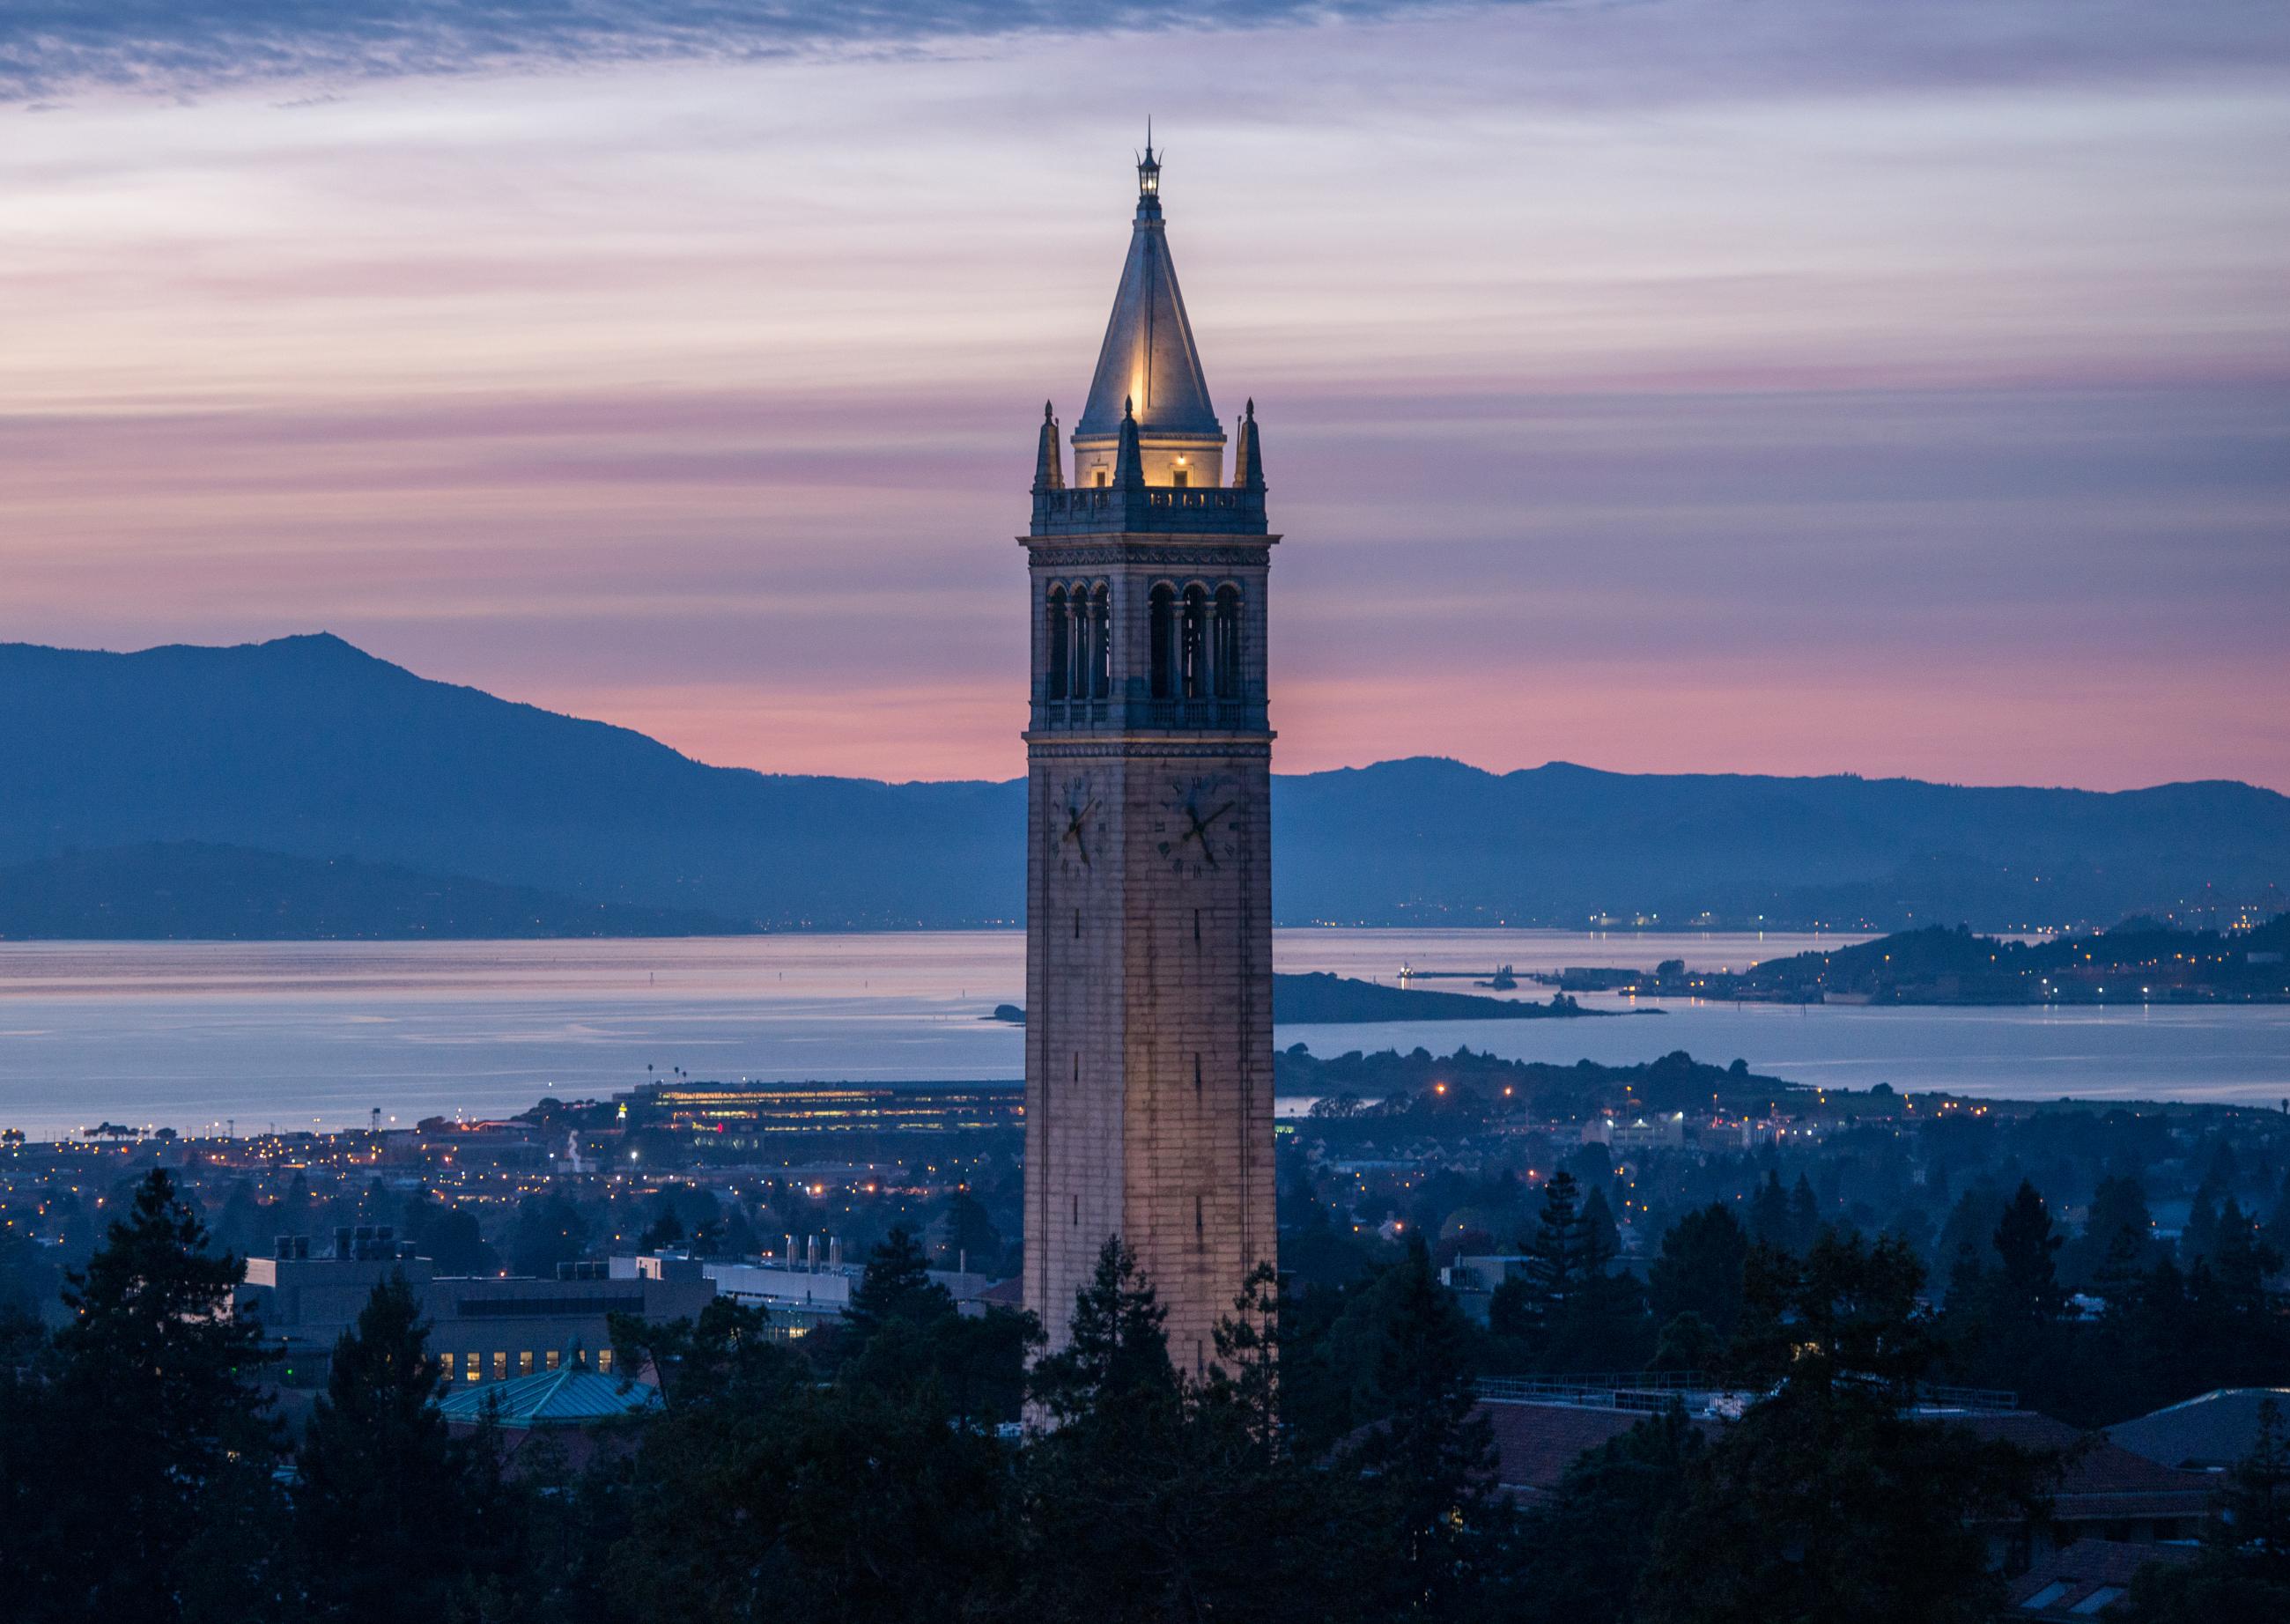 The proposed College of Computing, Data Science, and Society would be the first new college at UC Berkeley since the School of Journalism and the School of Public Policy were formed in the 1960s. (Sather Tower at sunset with a view of the bay. Photo /Matt Beardsley)